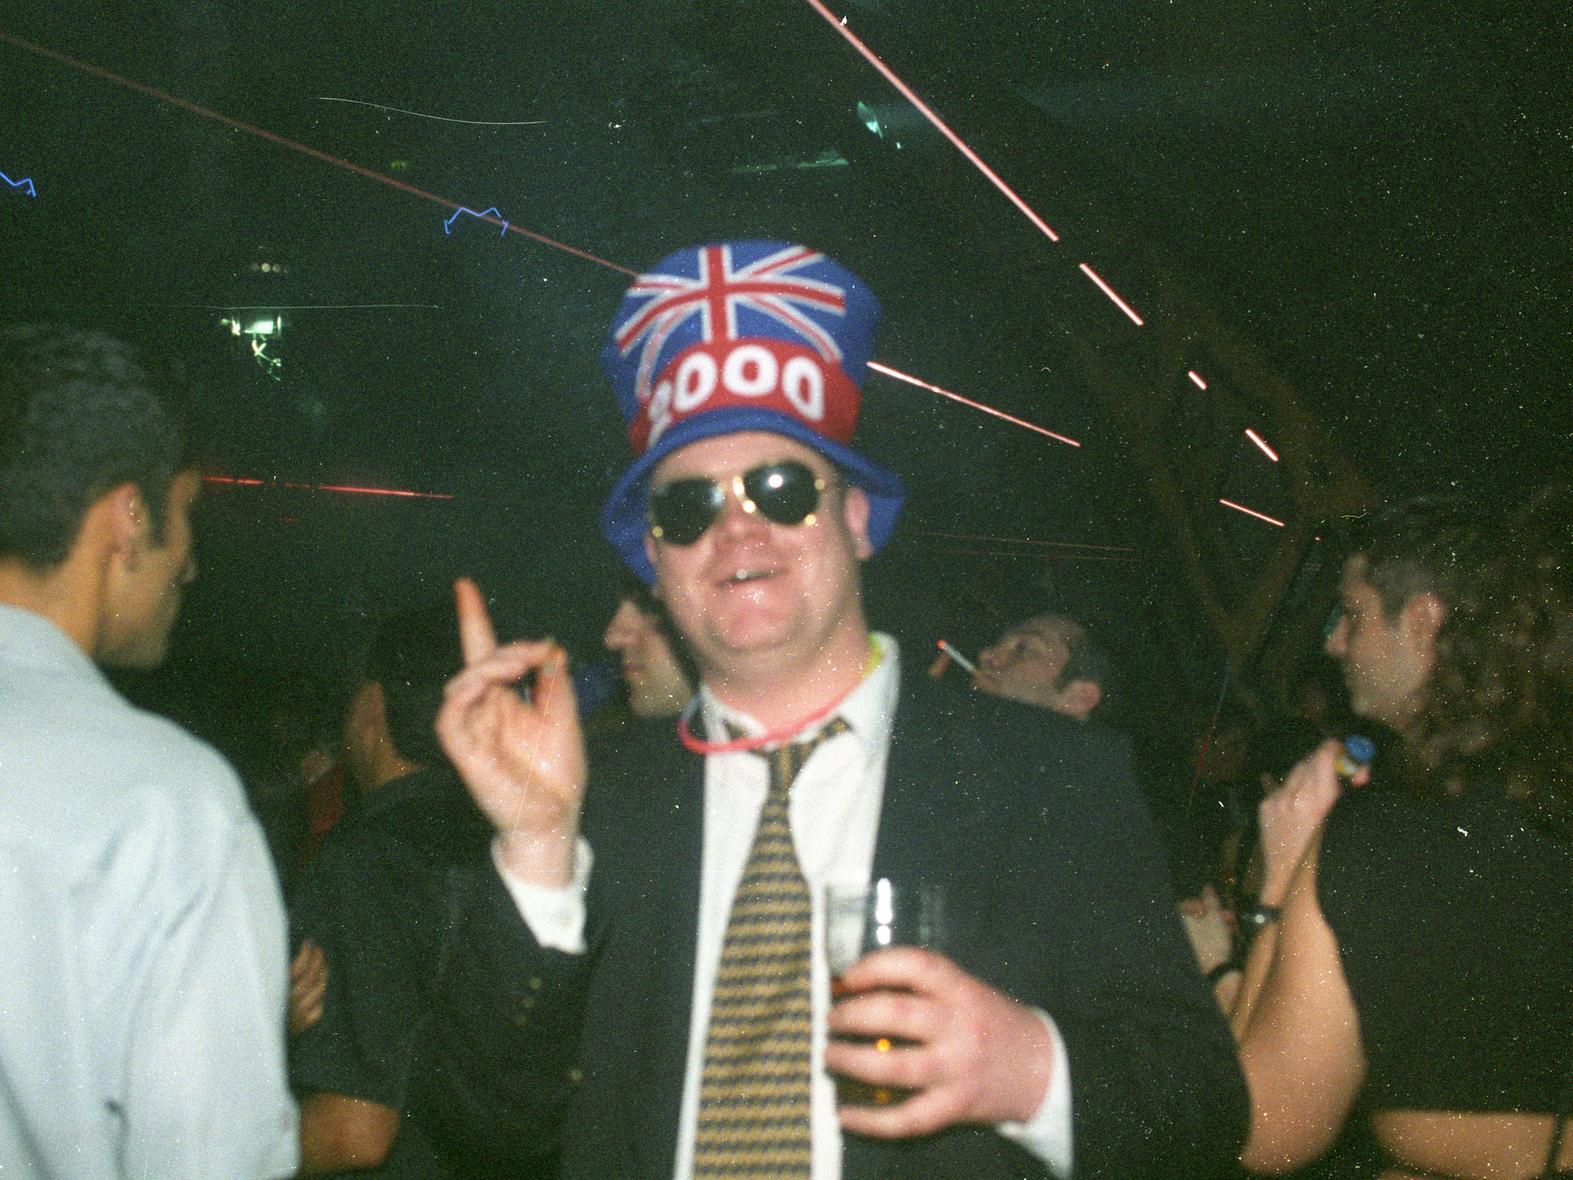 This reveller was suited up with cool shades and a hat to party, party, party.